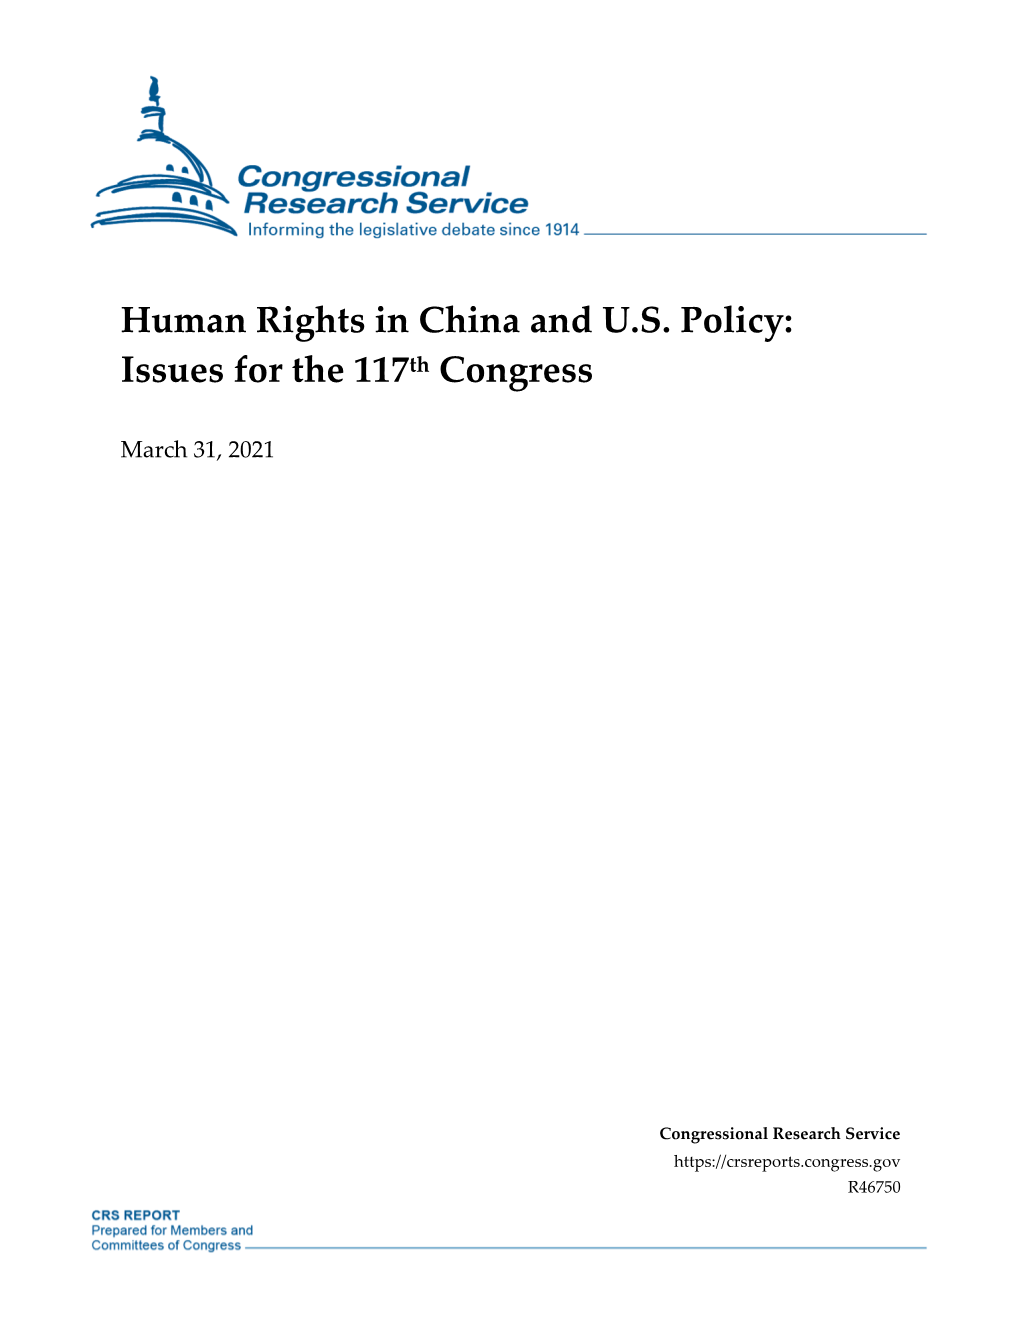 Human Rights in China and U.S. Policy: Issues for the 117Th Congress